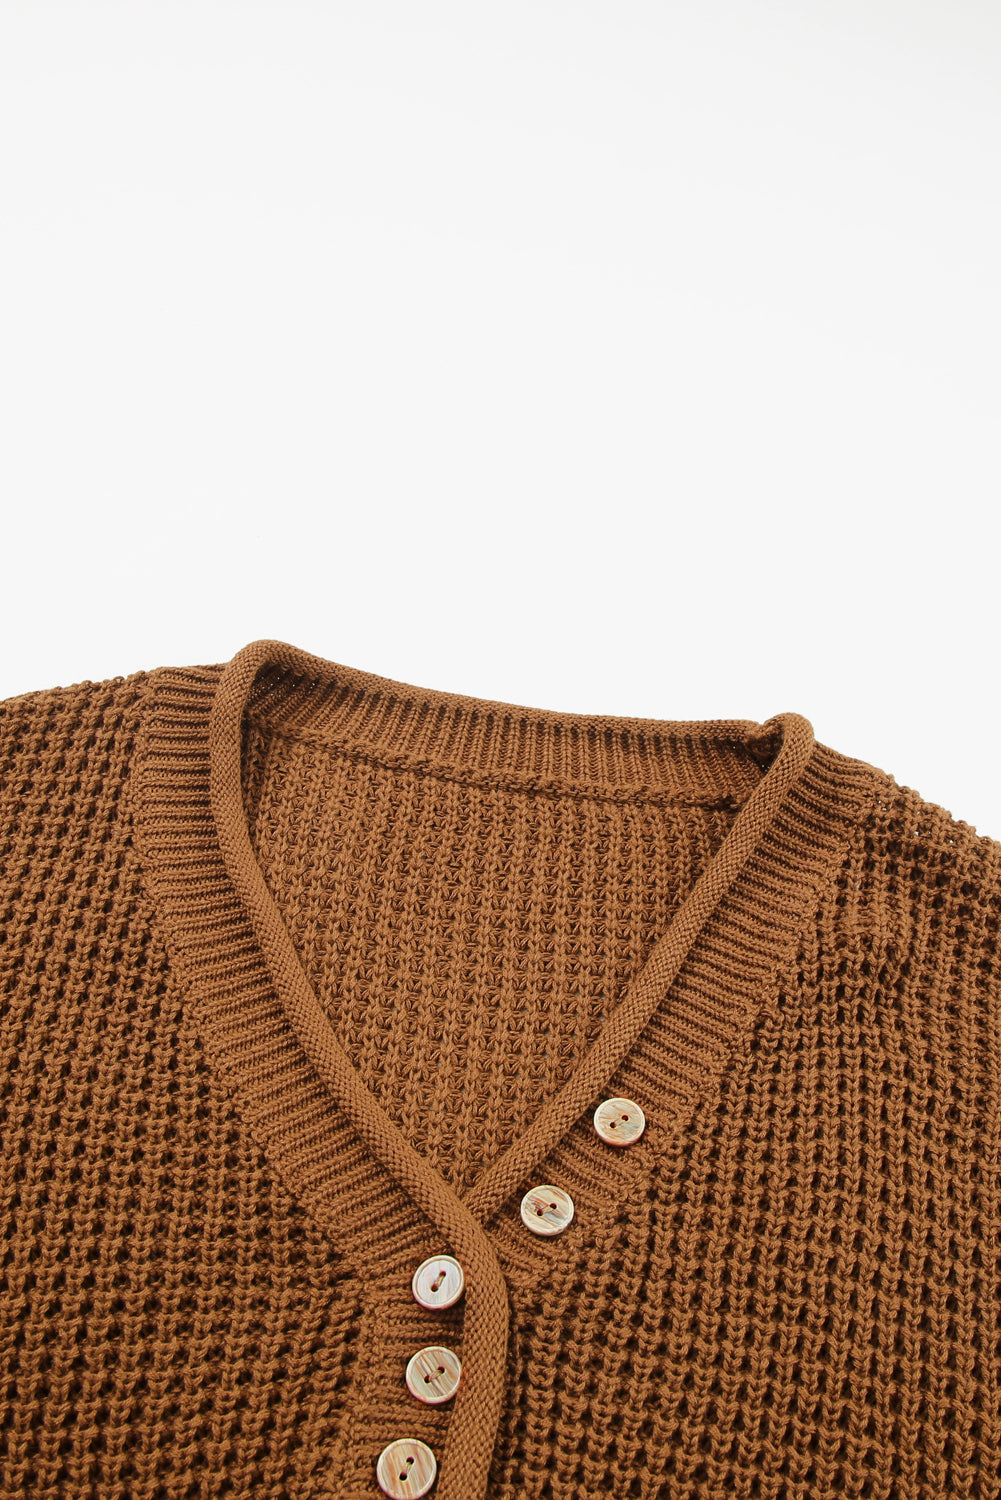 Coffee Pointelle Knit Button V Neck Drop Shoulder Sweater